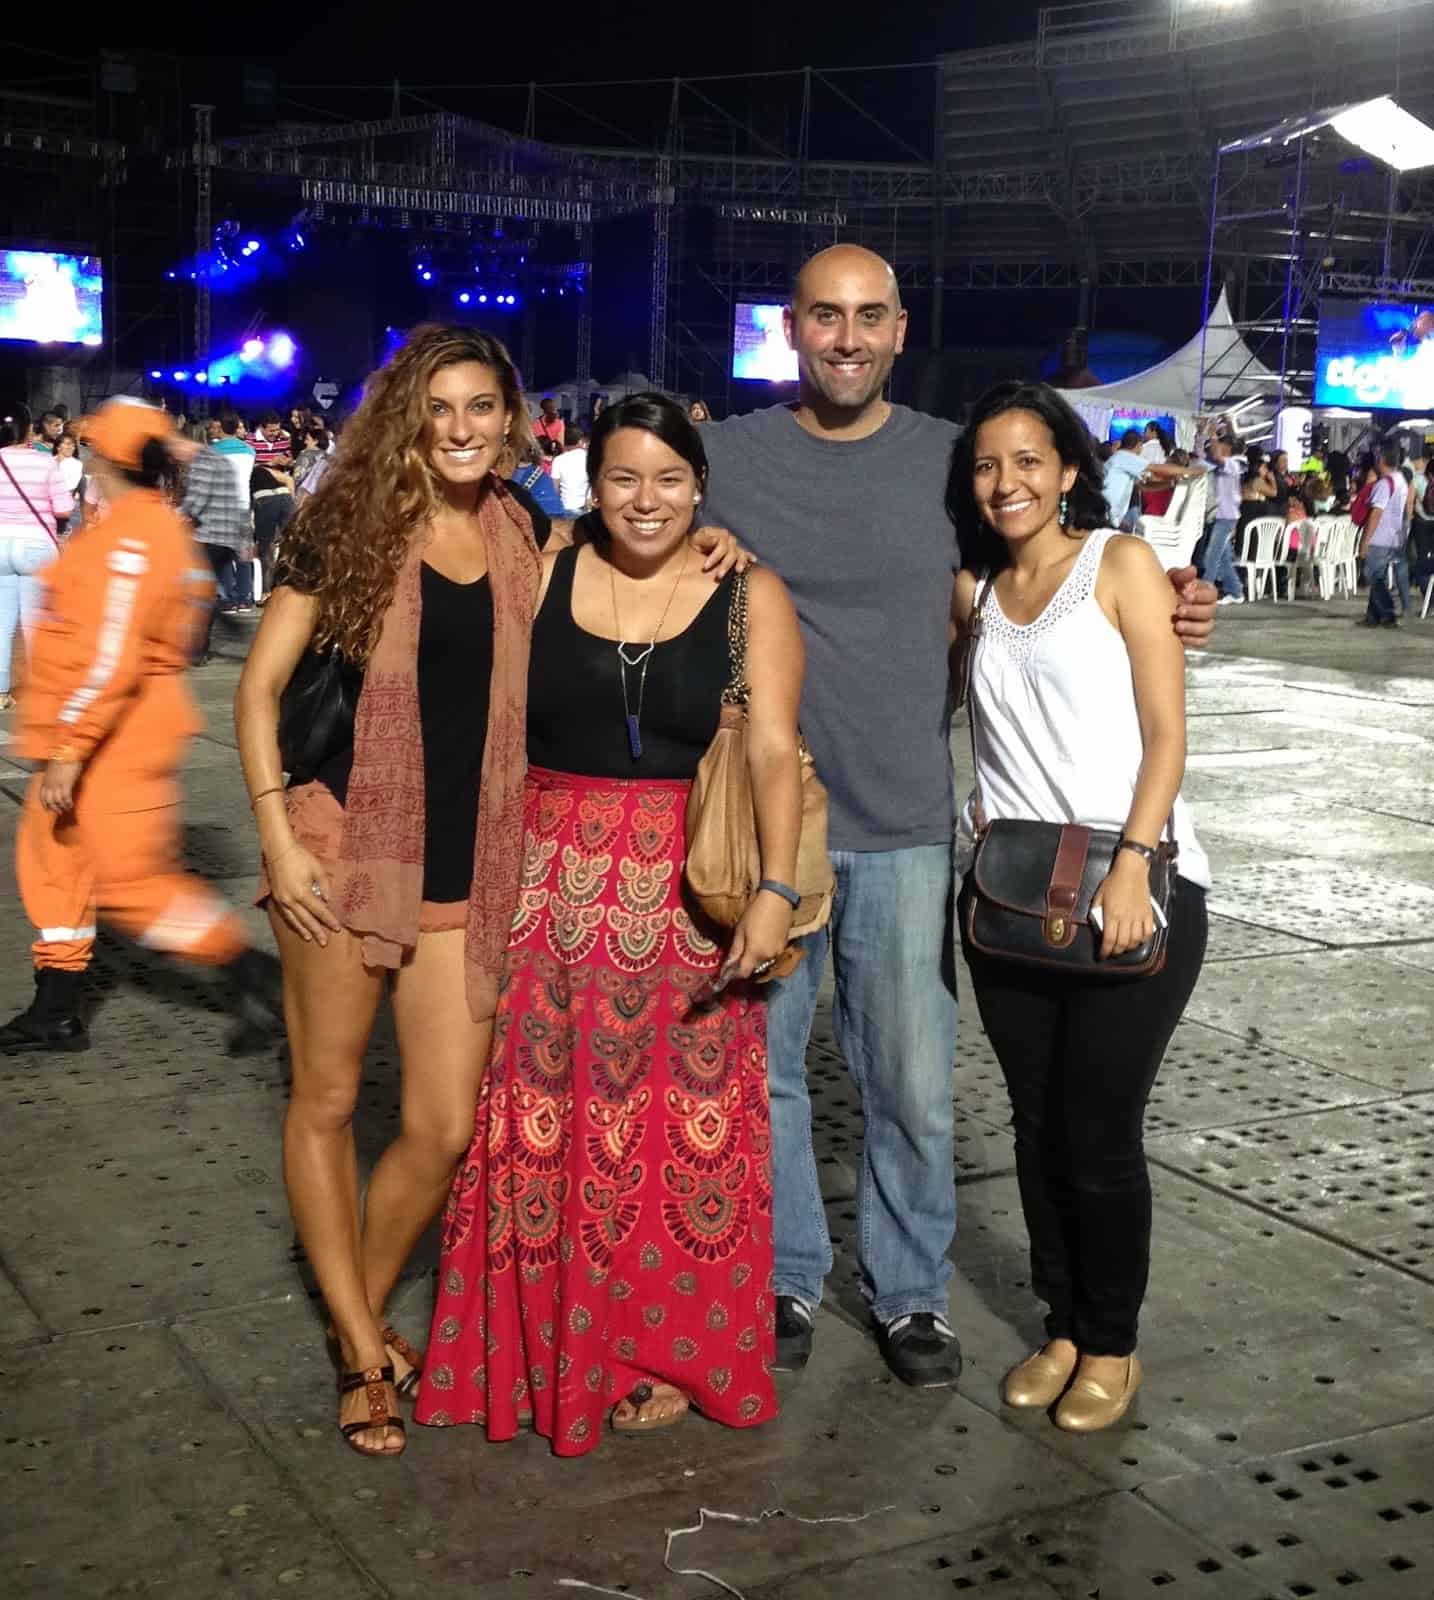 Our group at the Marc Anthony concert in Pereira, Risaralda, Colombia